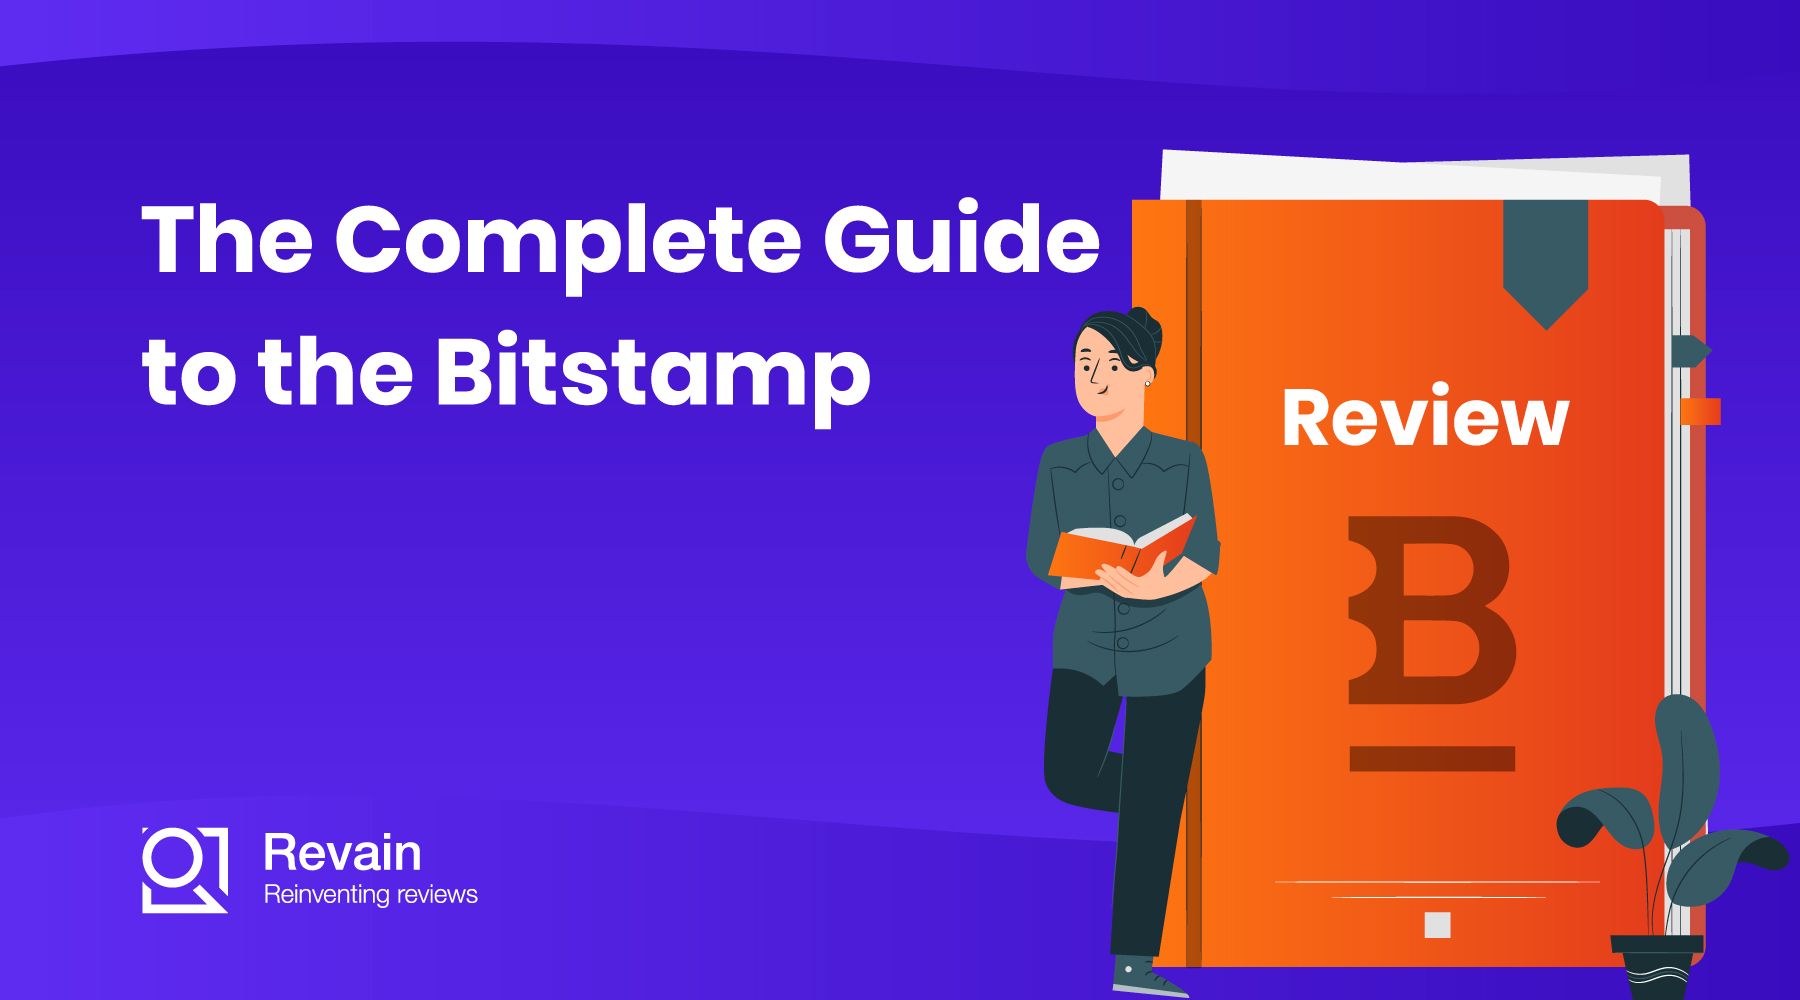 Article The Complete Guide to the Bitstamp Exchange